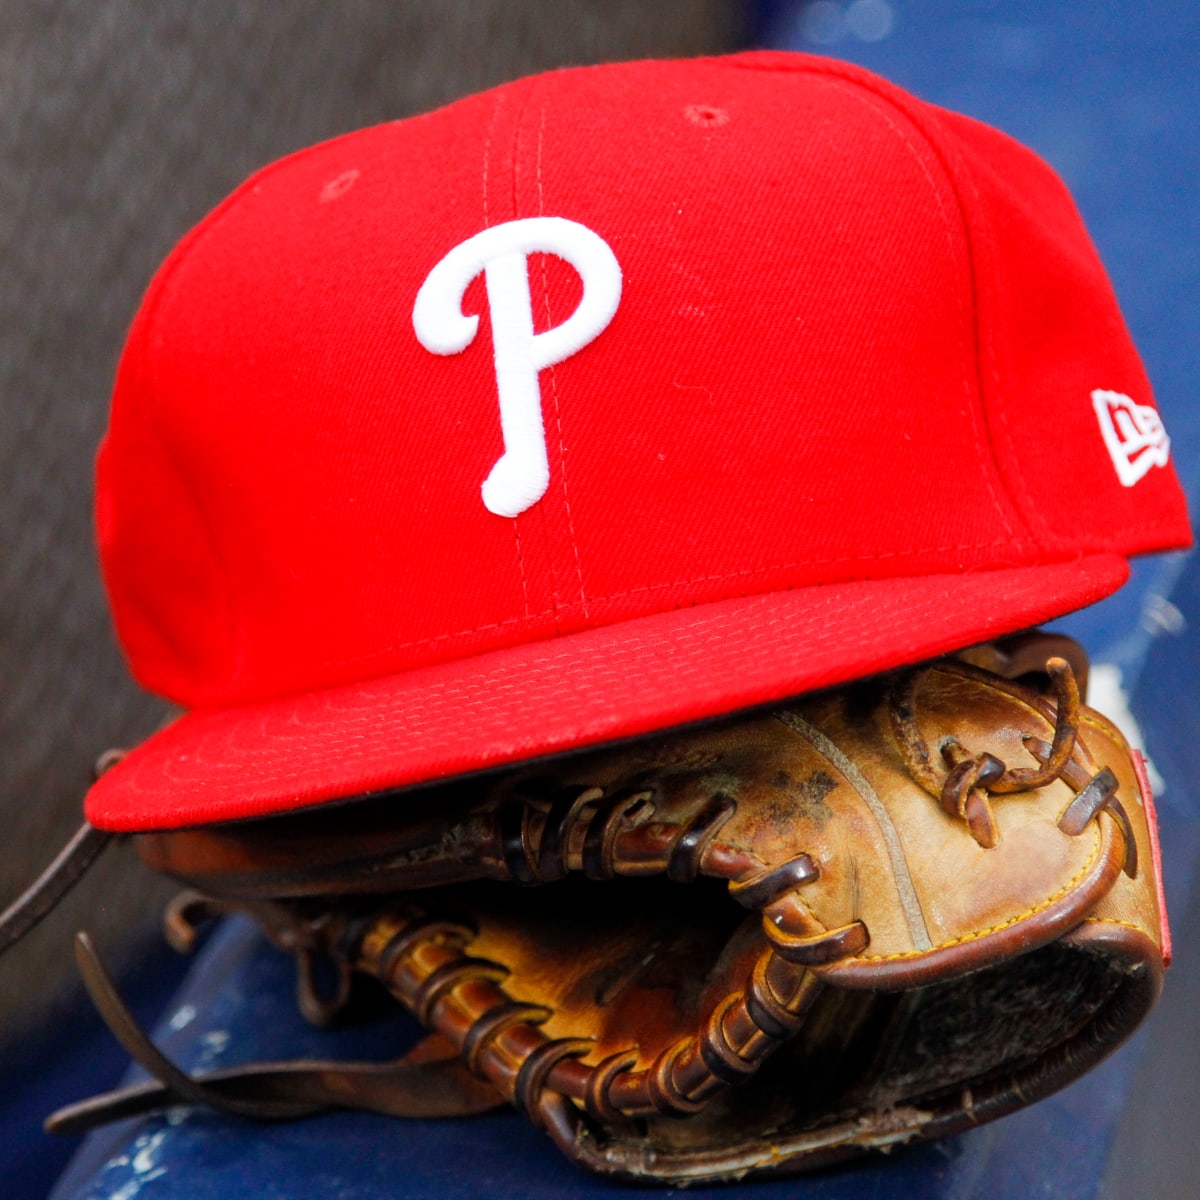 Former Phillies prospect Logan O'Hoppe to miss significant time